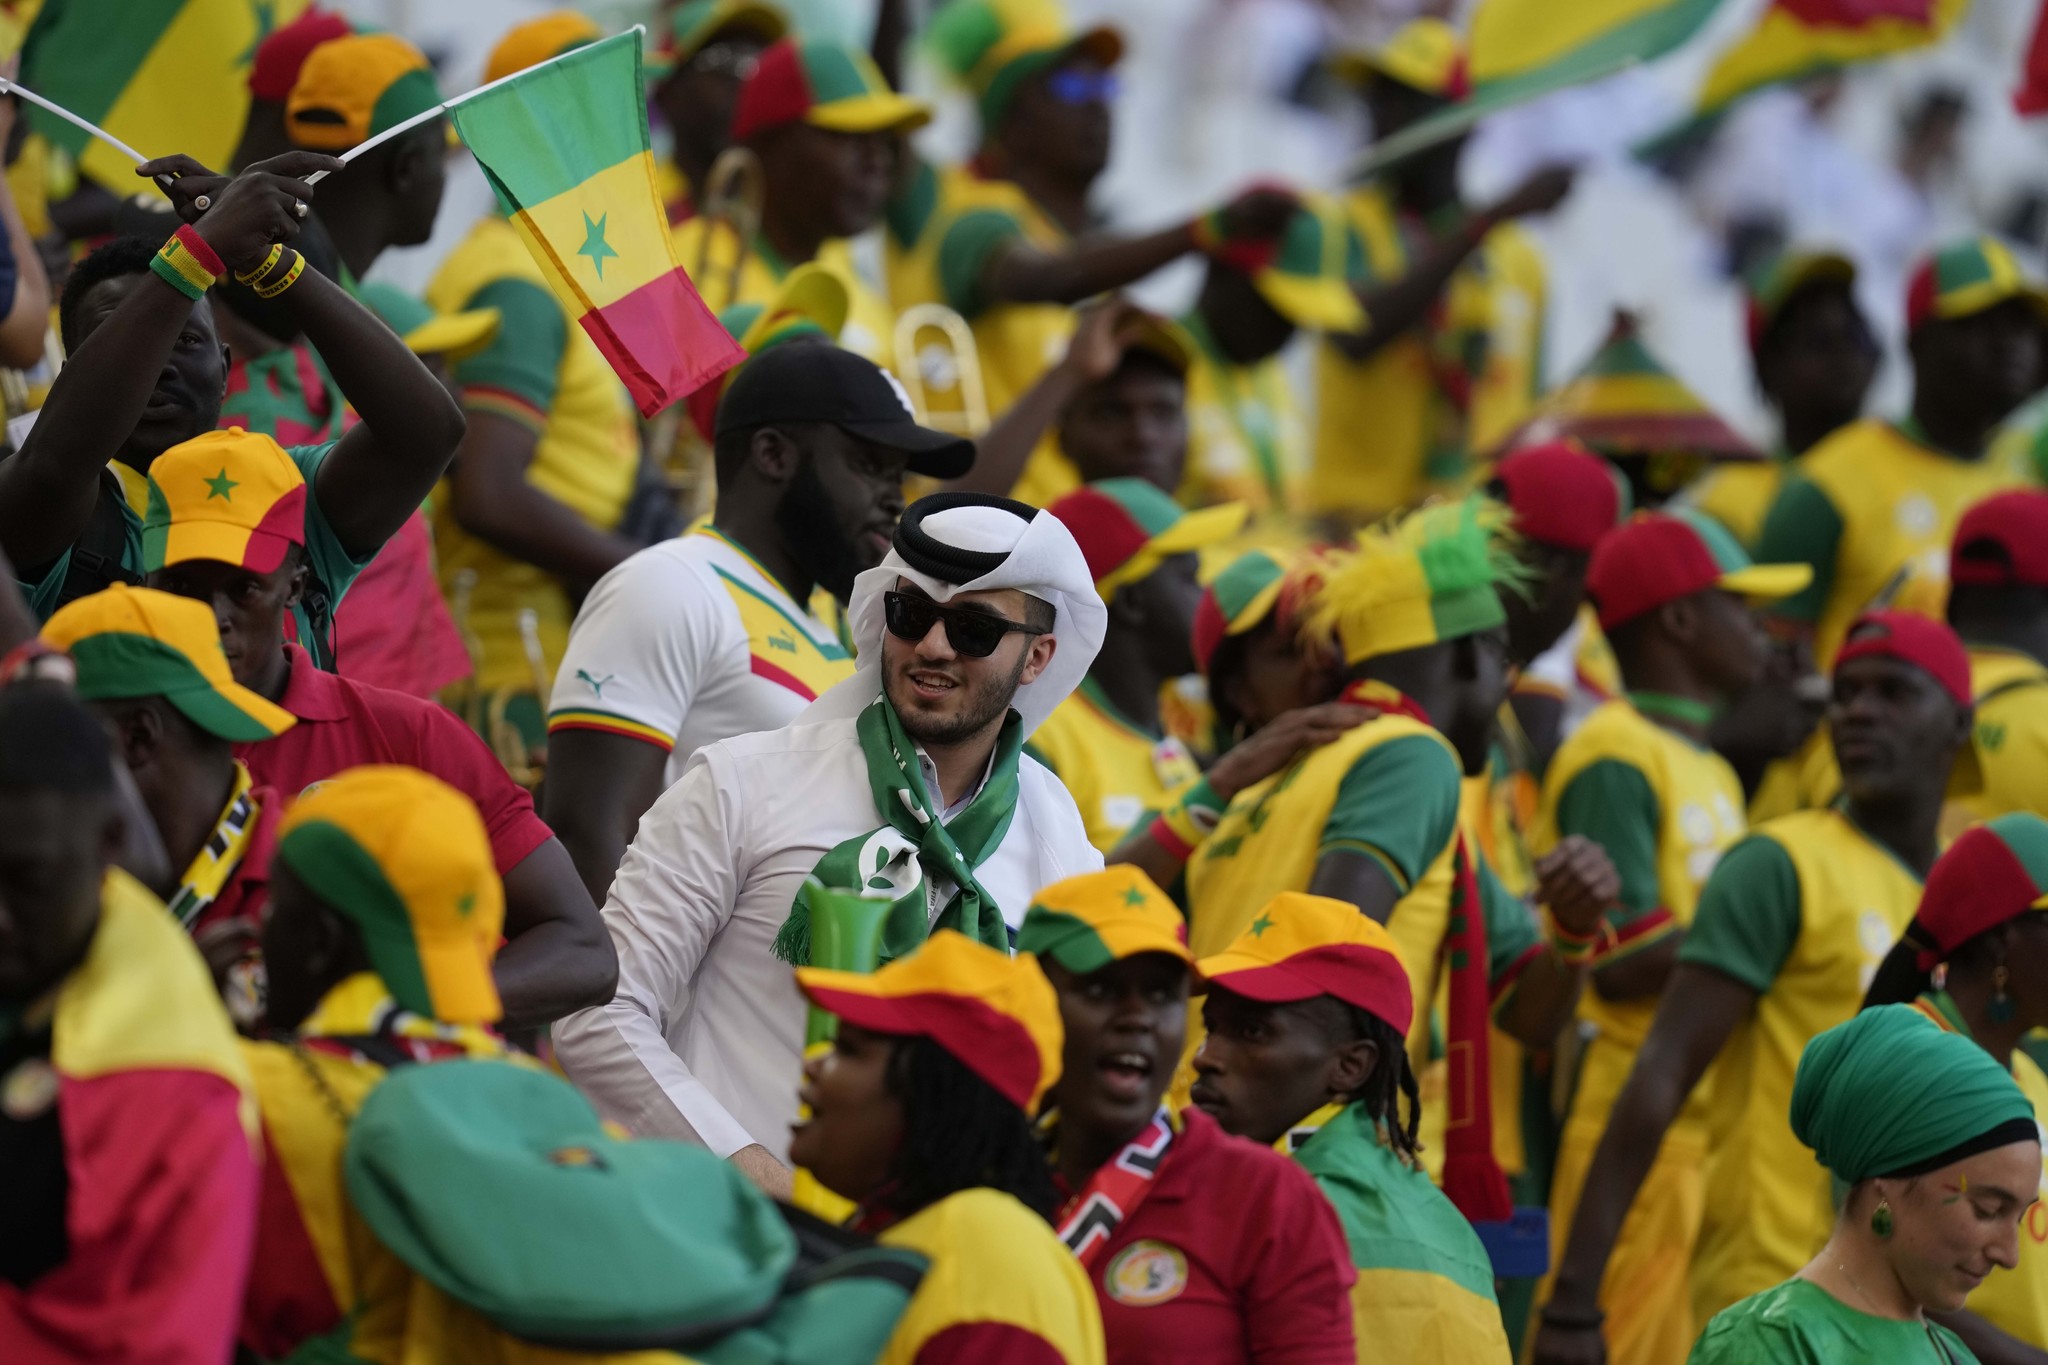  lt;HIT gt;Senegal lt;/HIT gt; fans cheer prior to the start of the World Cup group A soccer match between  lt;HIT gt;Qatar lt;/HIT gt; and  lt;HIT gt;Senegal lt;/HIT gt;, at the Al Thumama Stadium in Doha,  lt;HIT gt;Qatar lt;/HIT gt;, Friday, Nov. 25, 2022. (AP Photo/Thanassis Stavrakis)